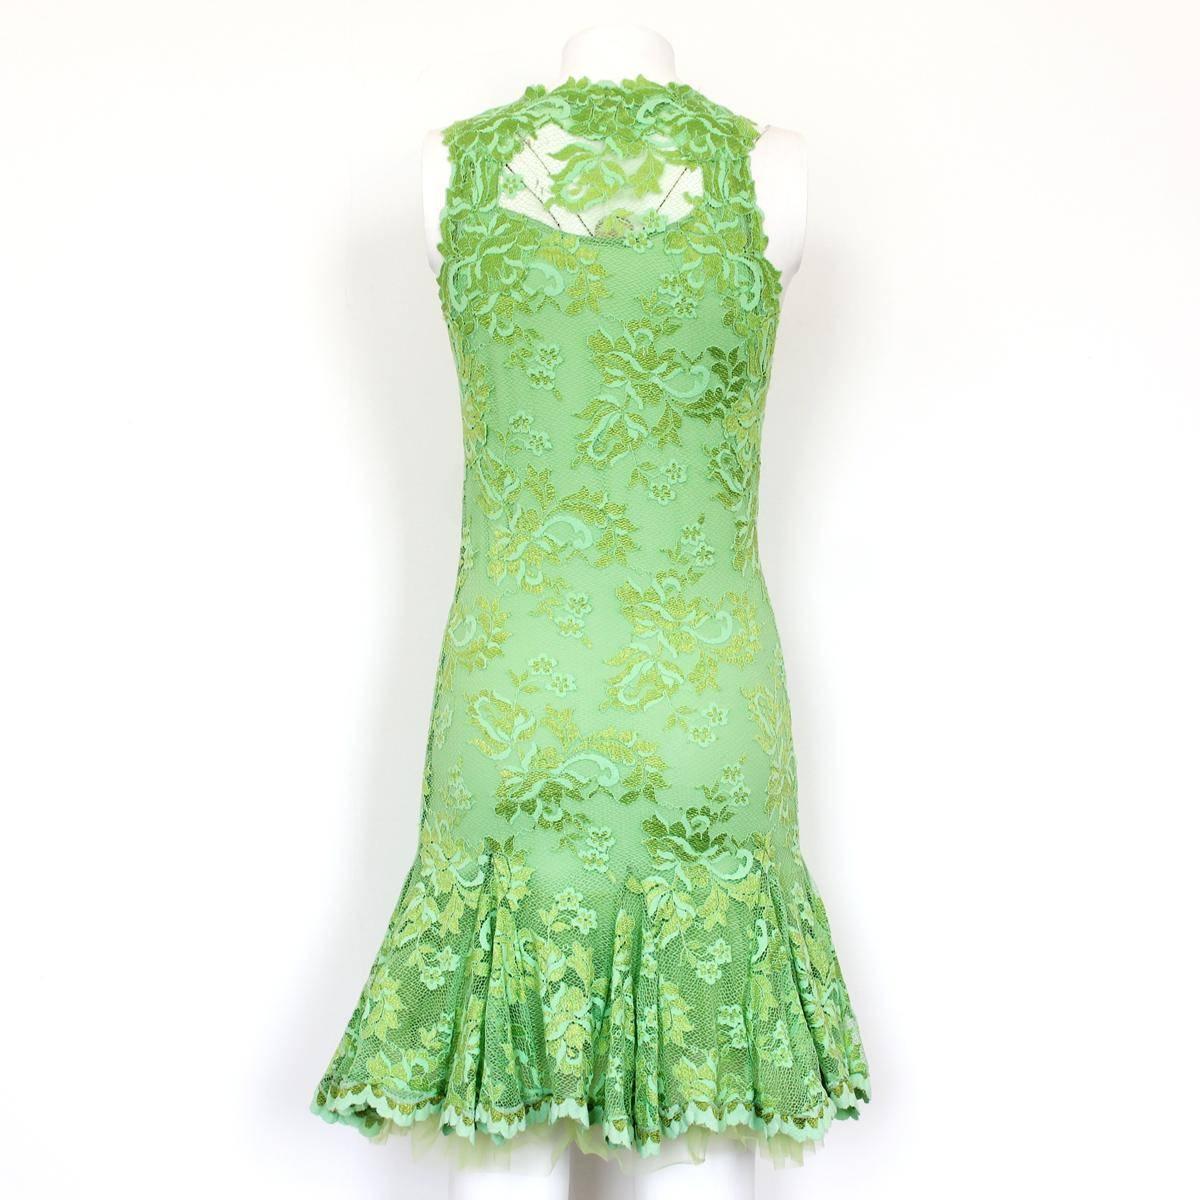 Chic lace dree by Olvi's
Green color
Sleeveless
With undervest
Total lenght (shoulder/hem) cm 90 (35.4 inches)
Original price € 1500
Worldwide express shipping included in the price !